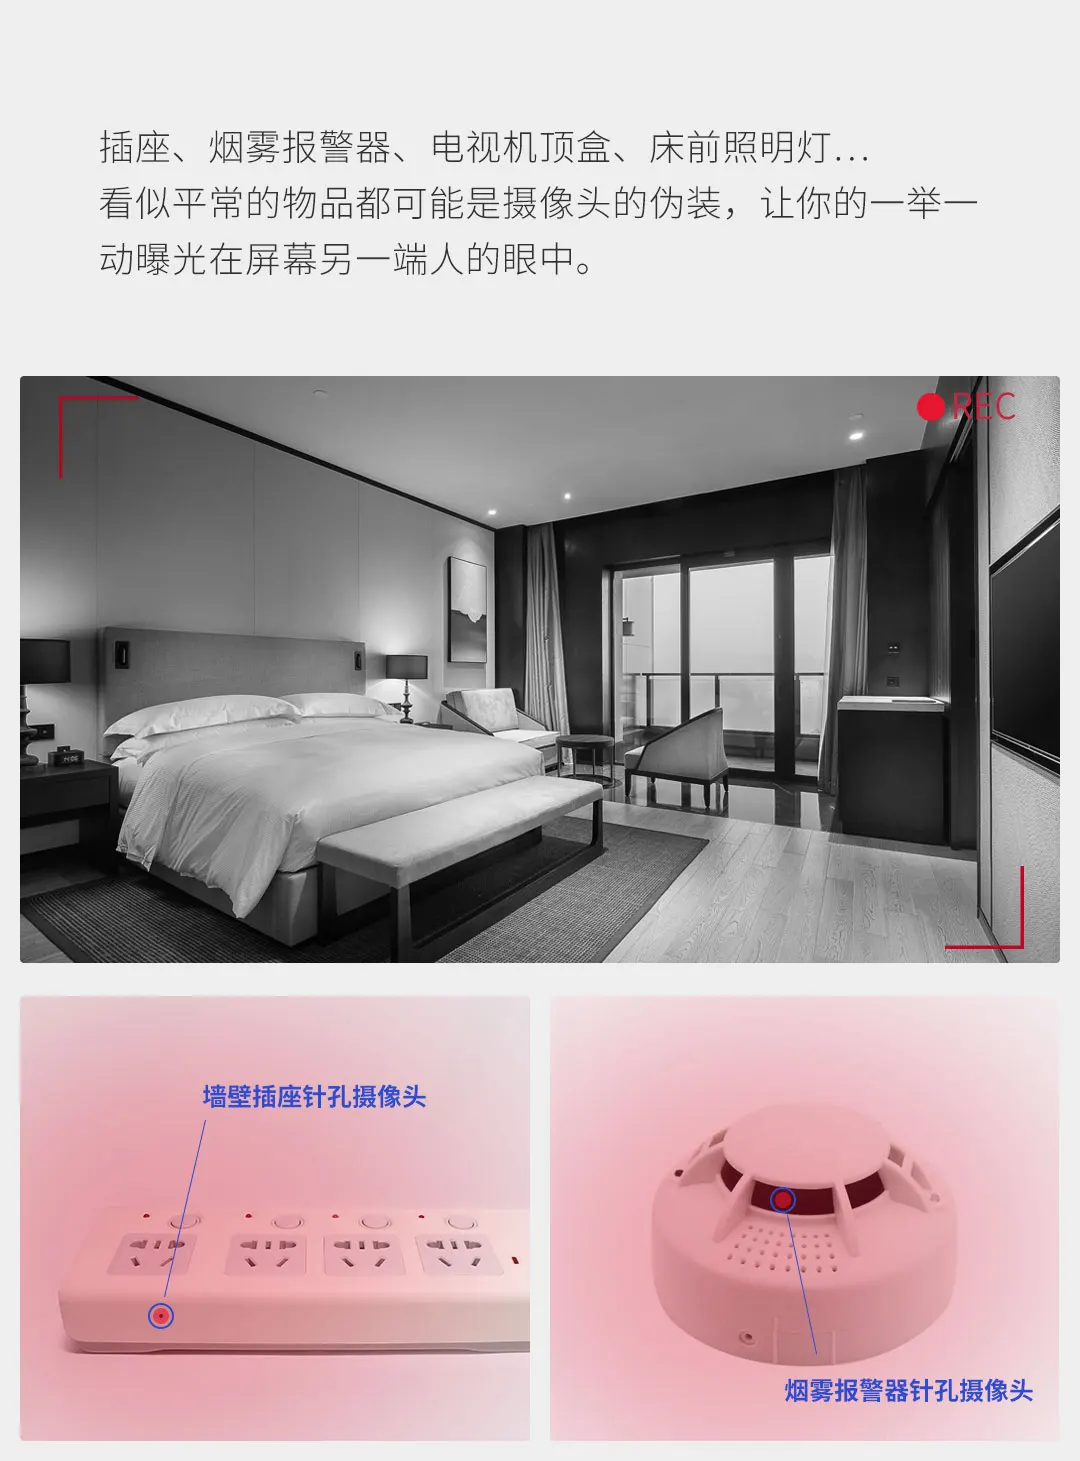 New Xiaomi Mijia Youpin Smoovie Multifunction Infrared Detector Infrared detection sound and light alarm compact and portable